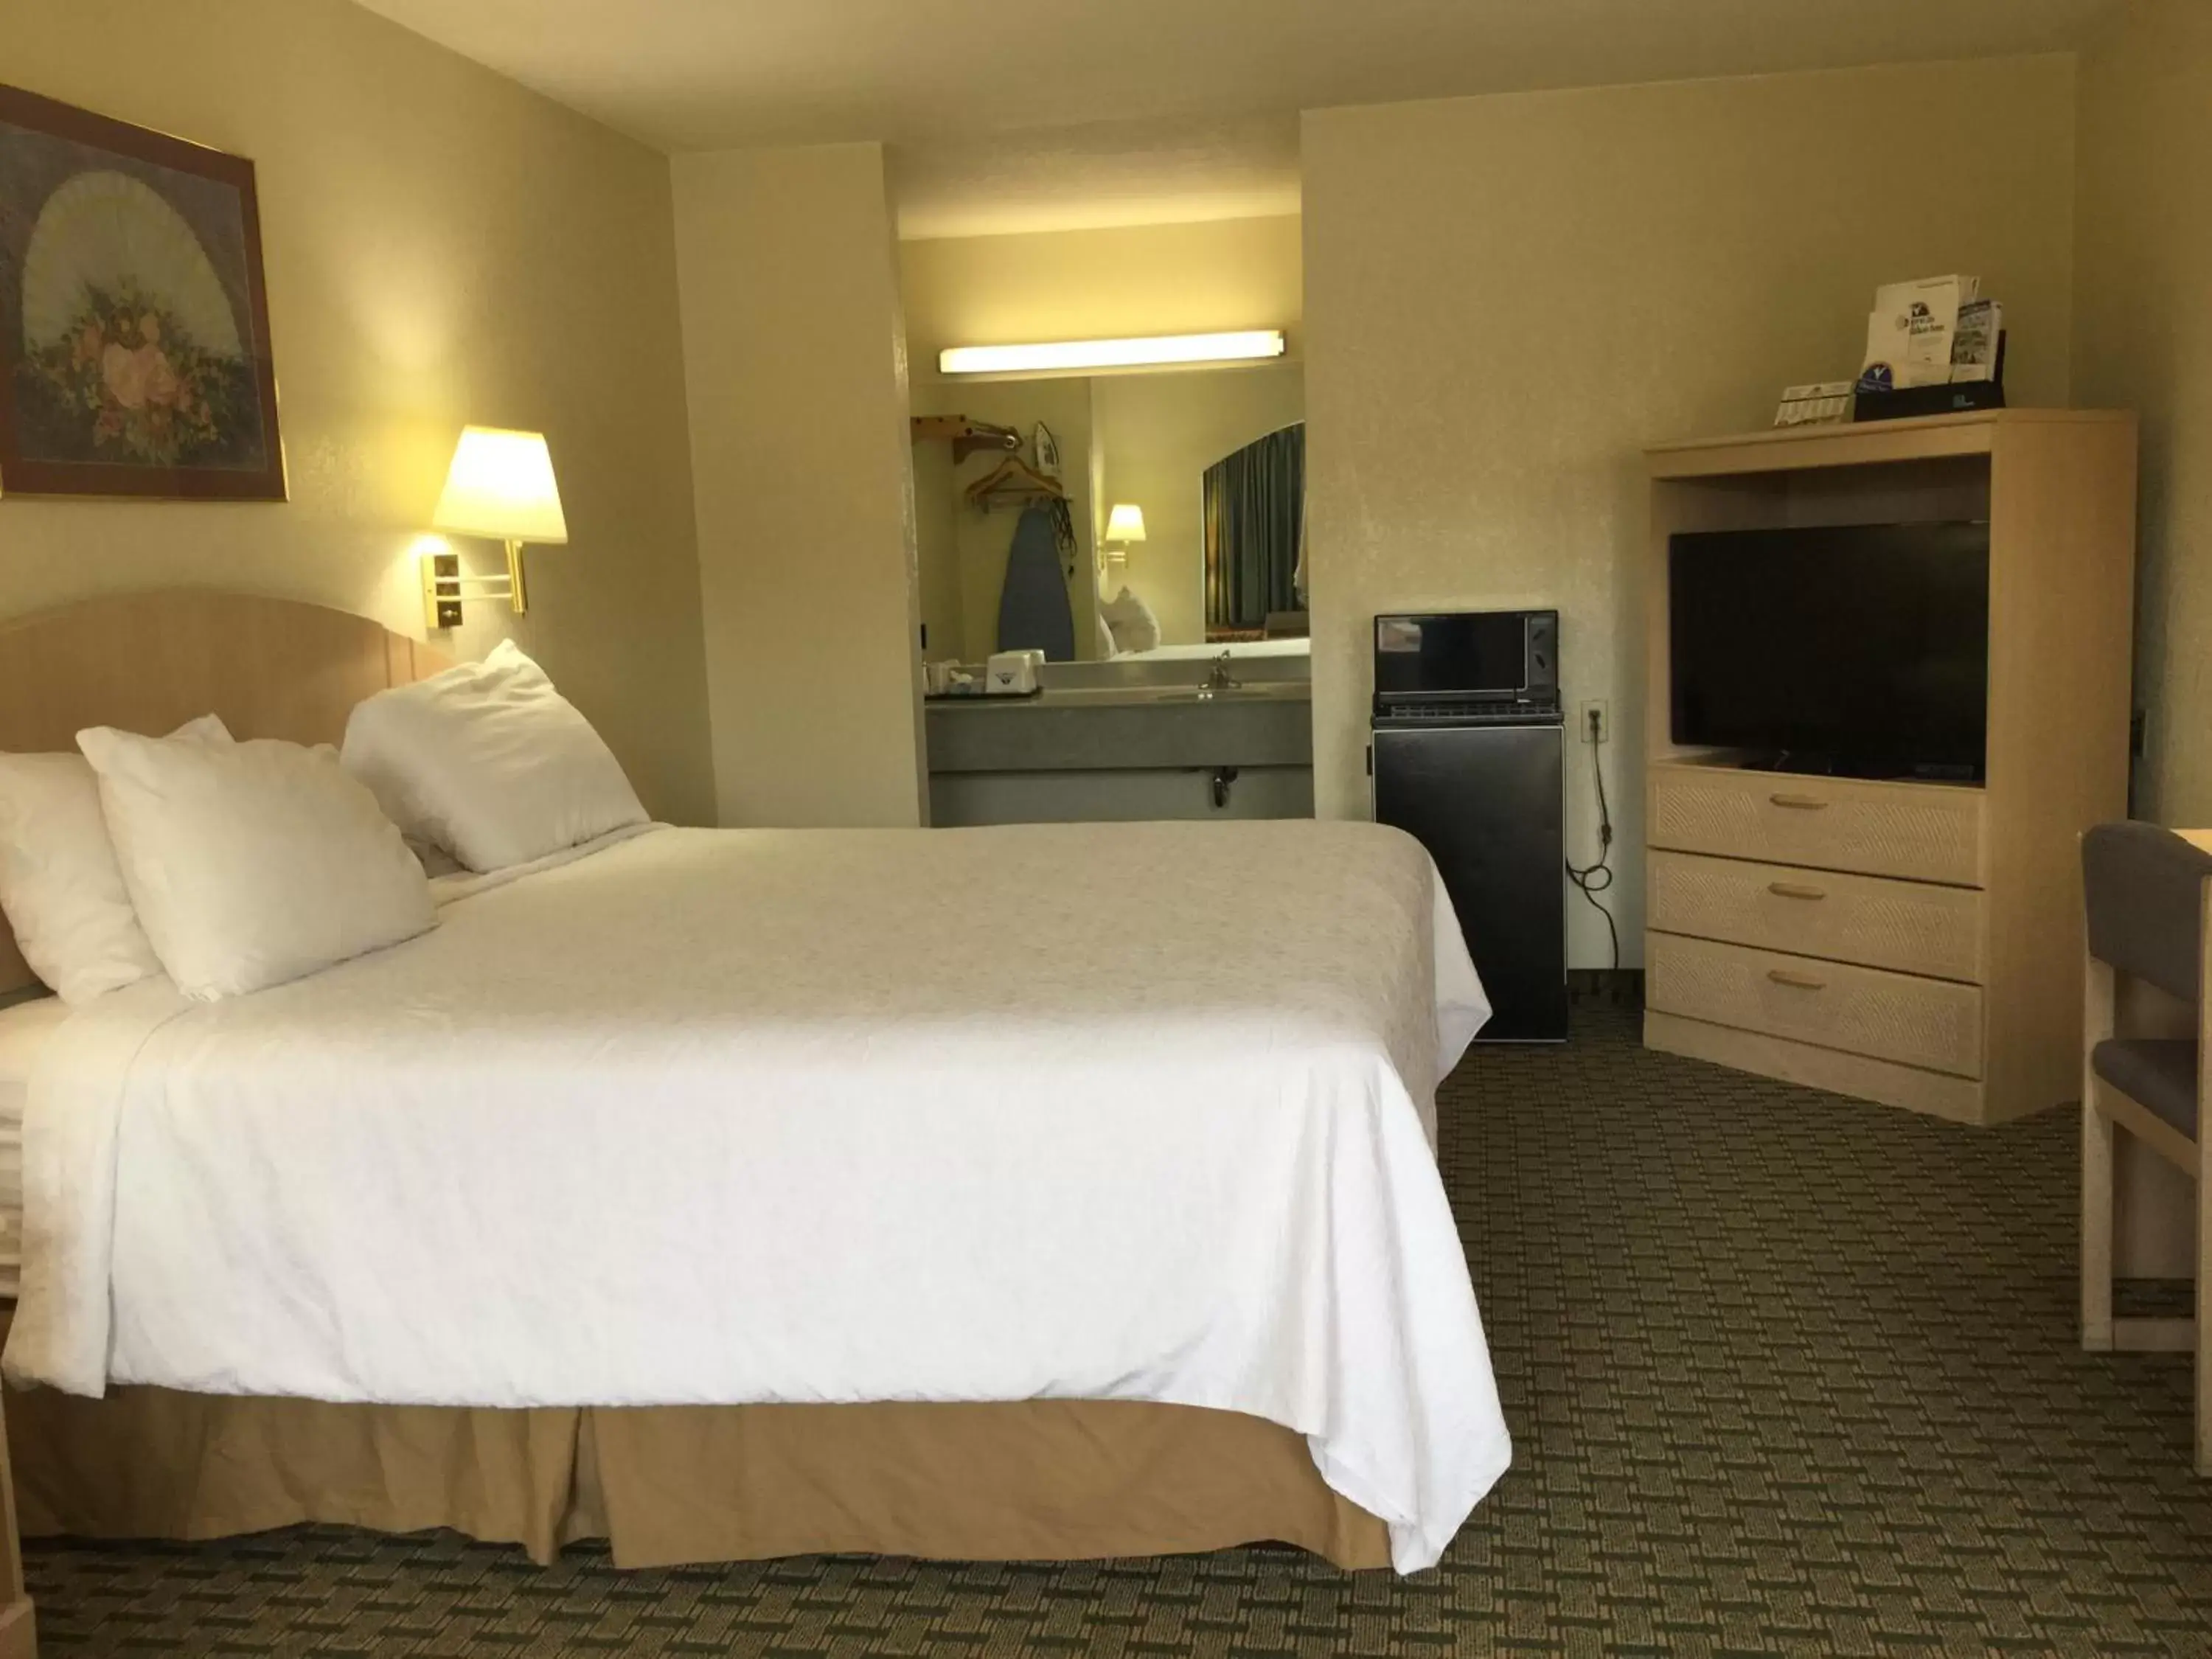 Property building, Room Photo in Americas Best Value Inn Cabot